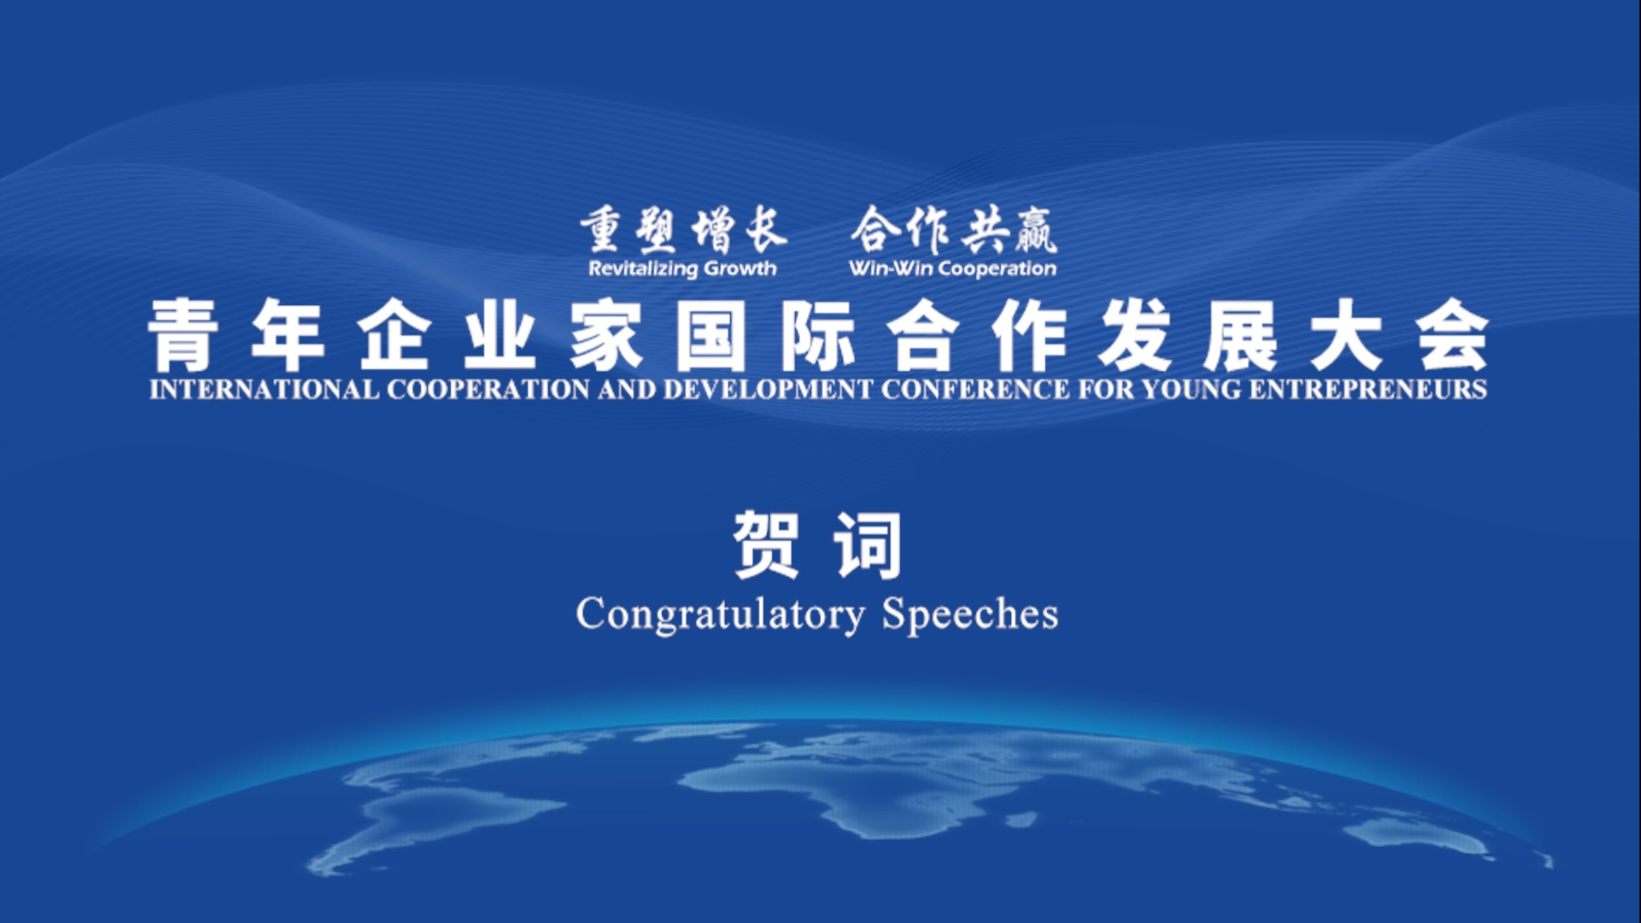 Congratulatory Speeches of the International Cooperation and Development Conference for Young Entrepreneurs